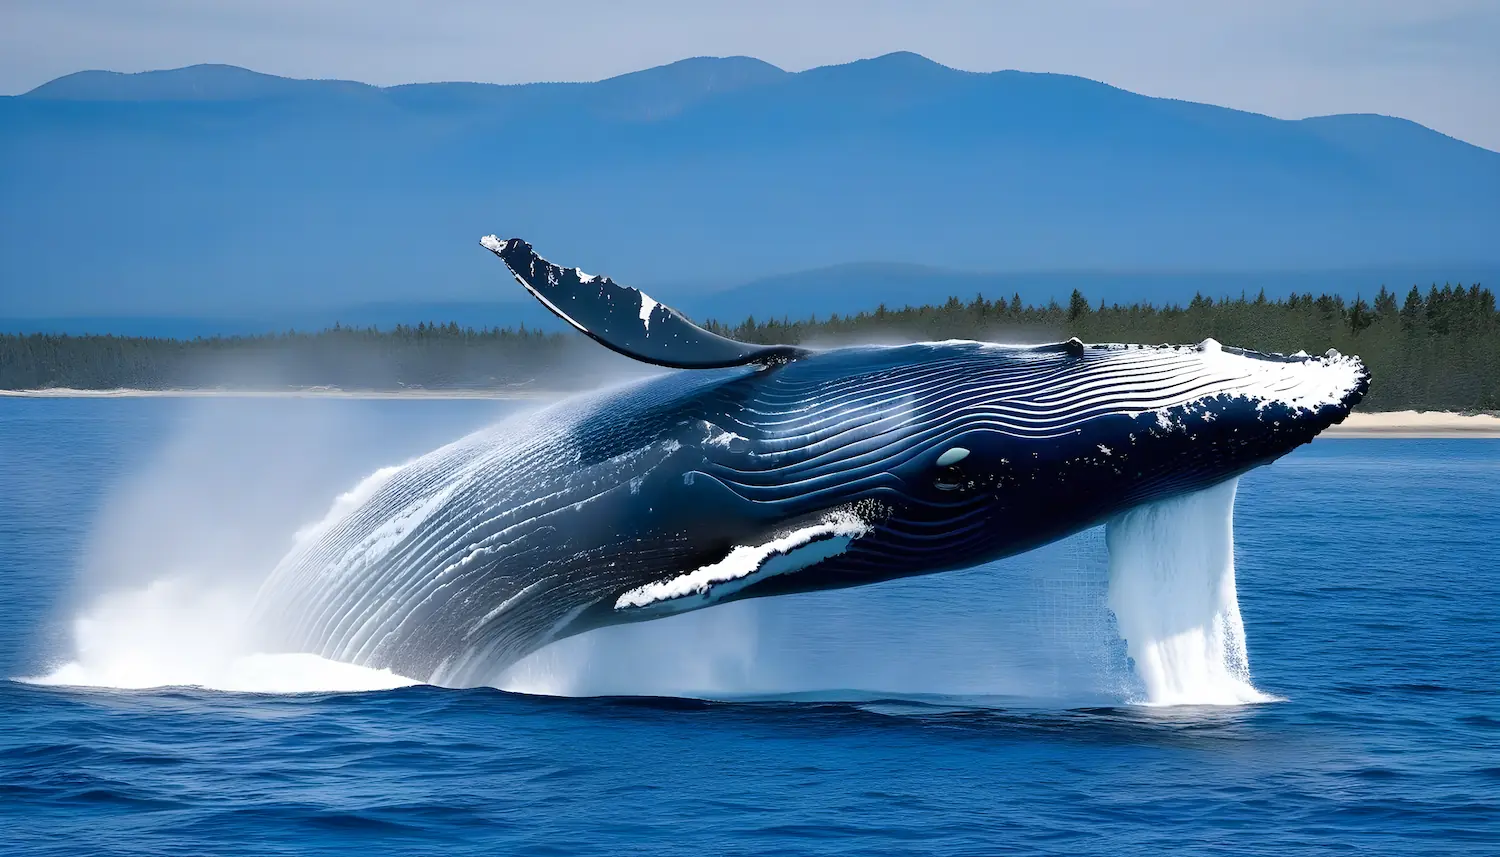 All About the Blue Whale (Balaenoptera musculus)